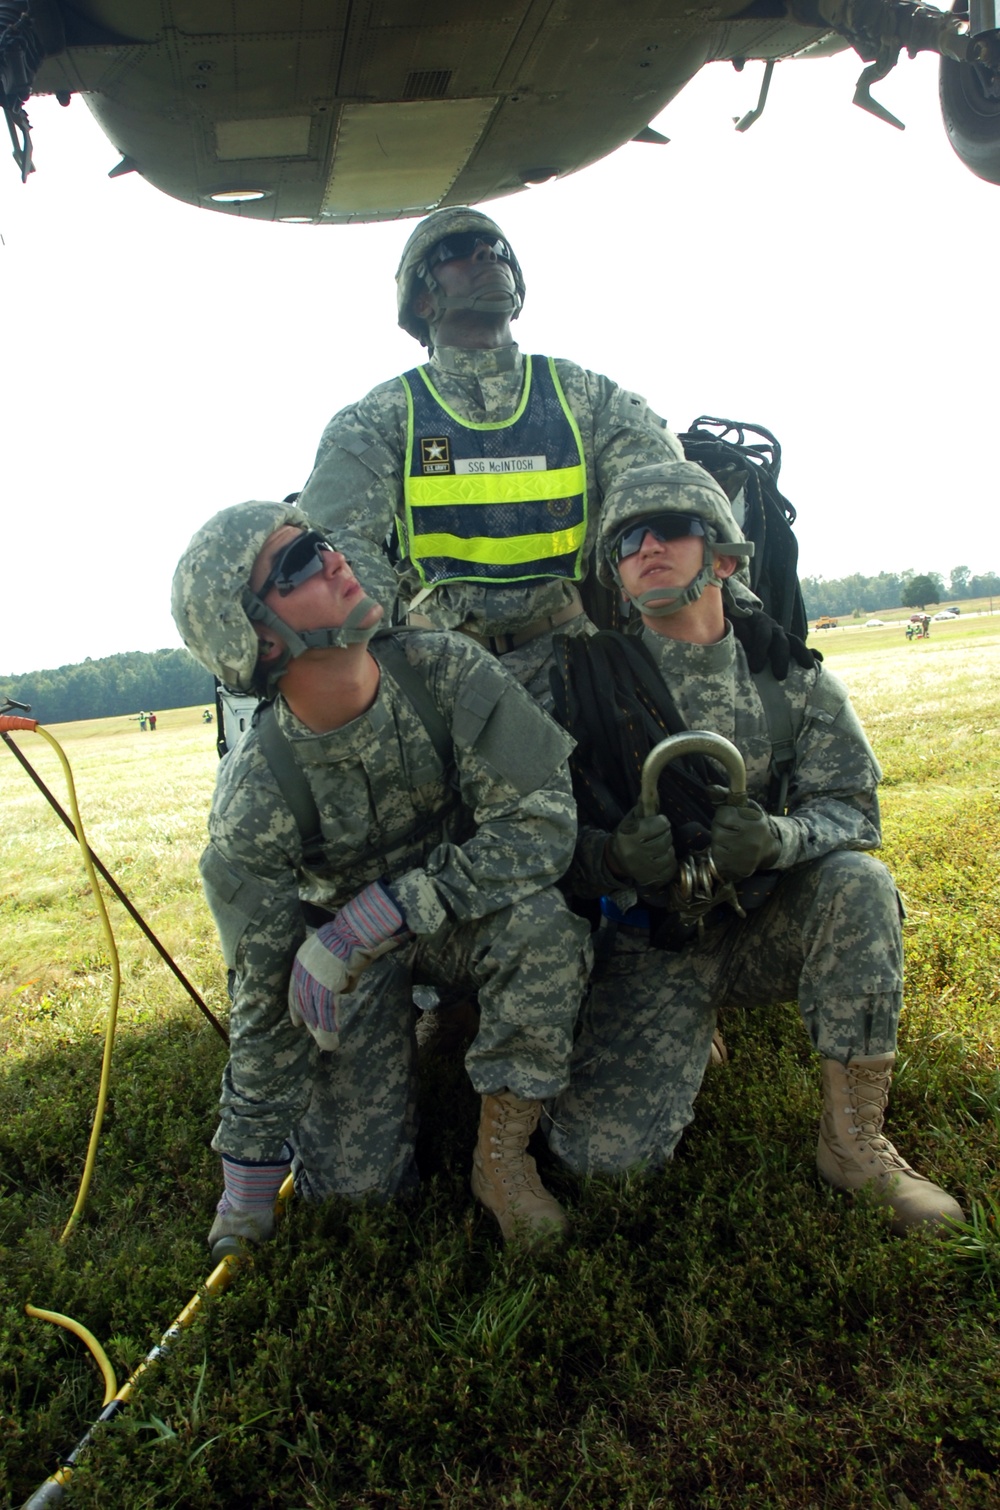 Sling load operations provide valuable training to Virginia Guard aviators, Fort Lee students